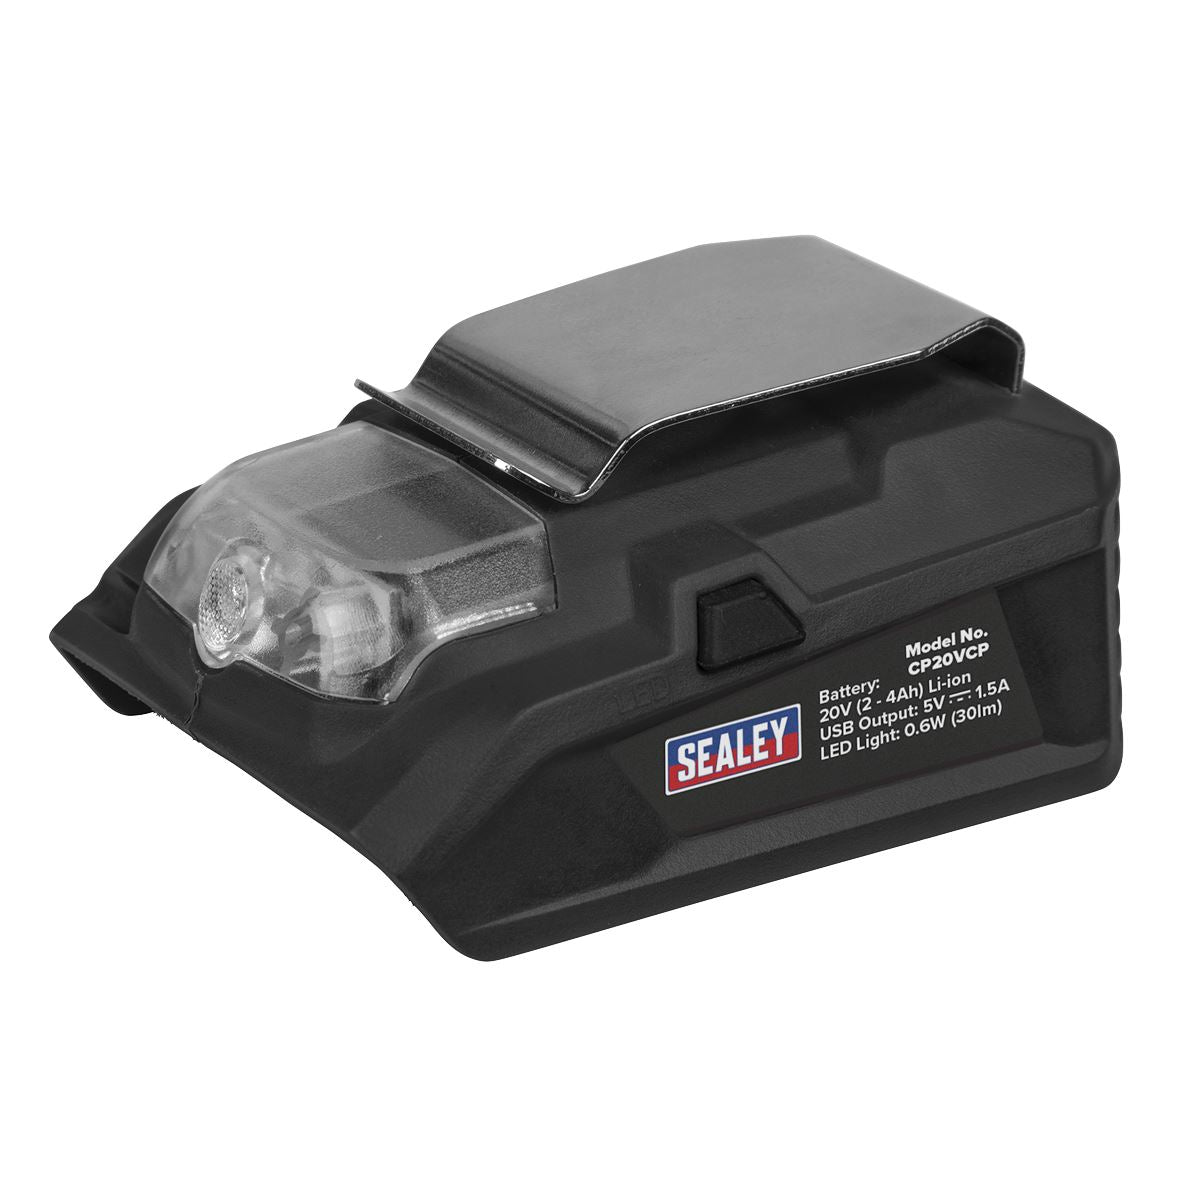 Sealey USB Charge Port for SV20 CP20V Series Cordless Power Tools